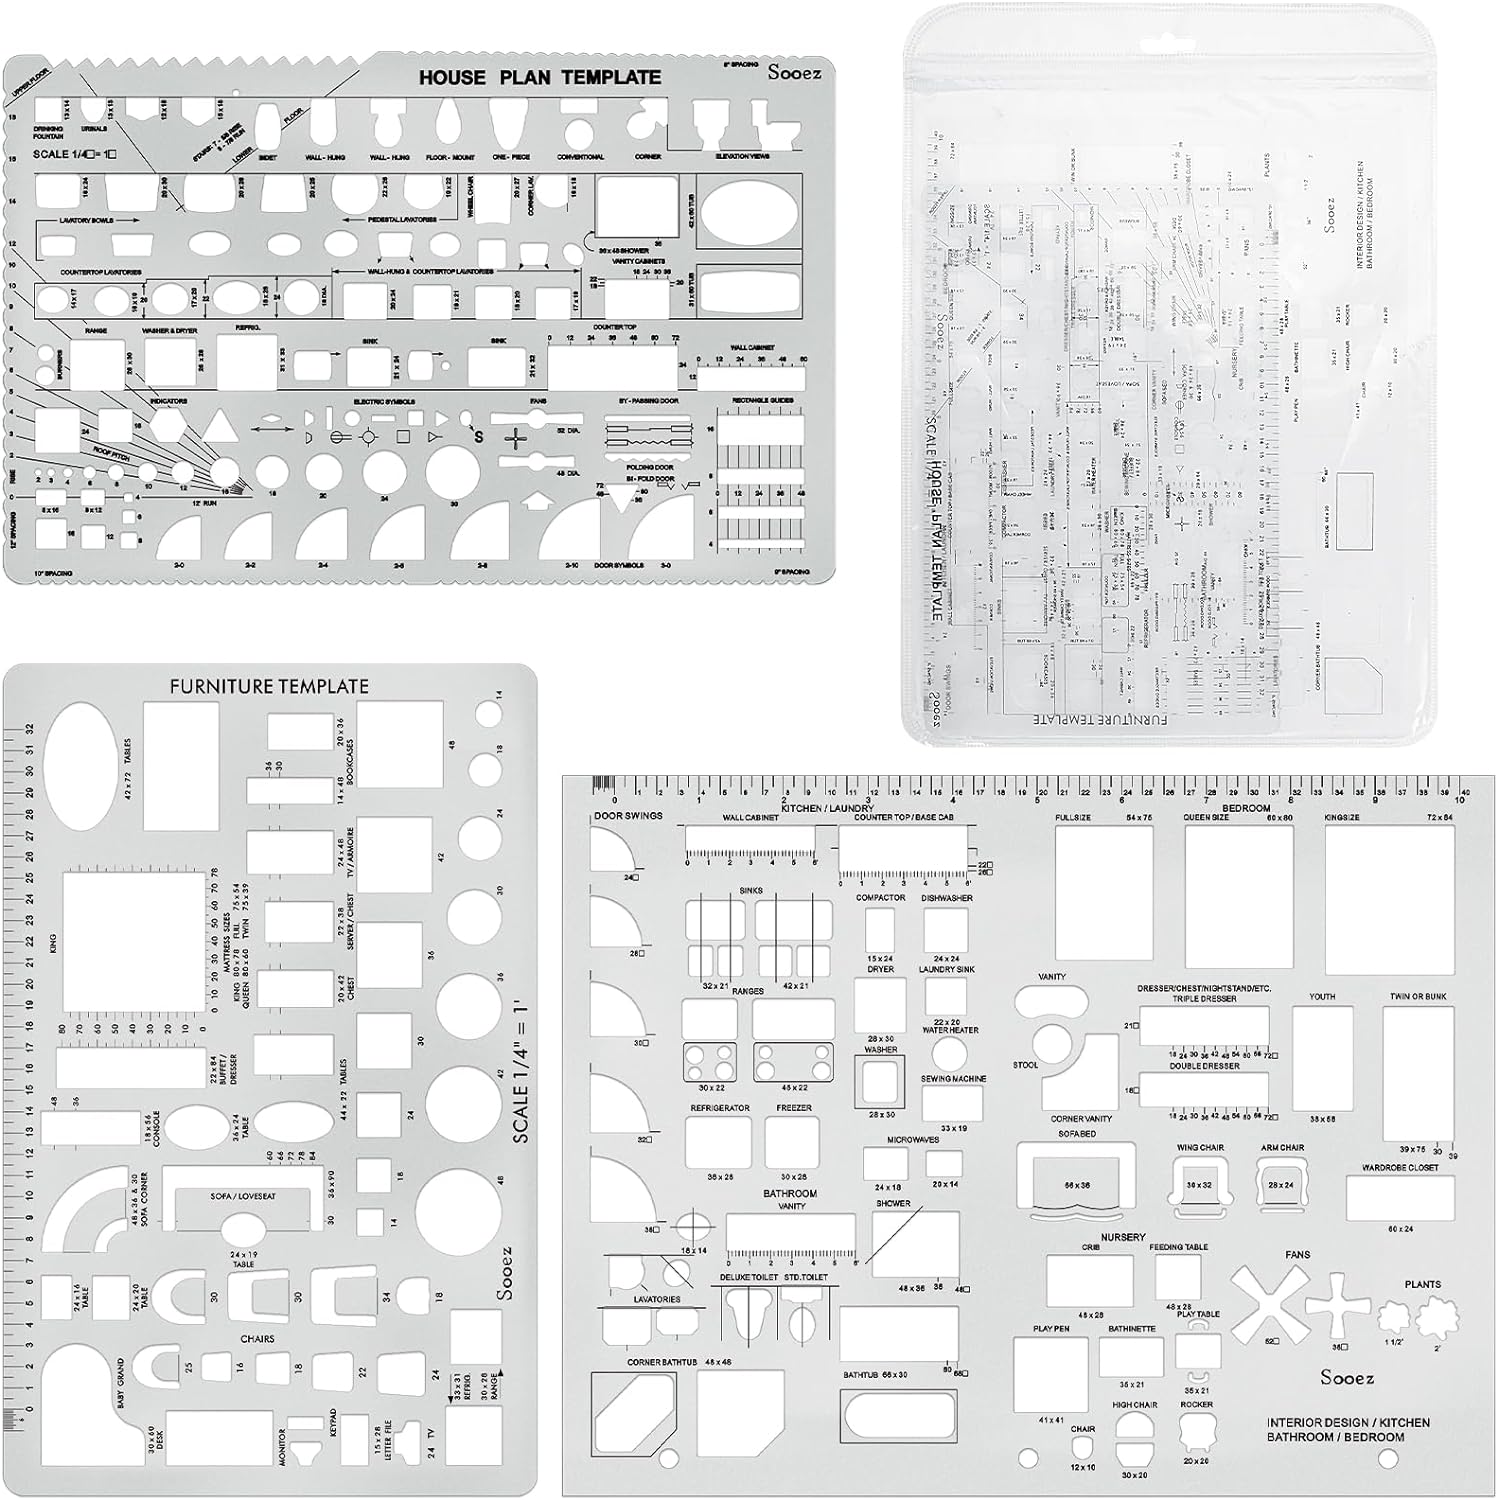 Sooez Architectural Templates, House Plan Template, Interior Design Template, Furniture Template, Drawing Template Kit, Drafting Tools and Supplies, Template Architecture Kit, Set of 3